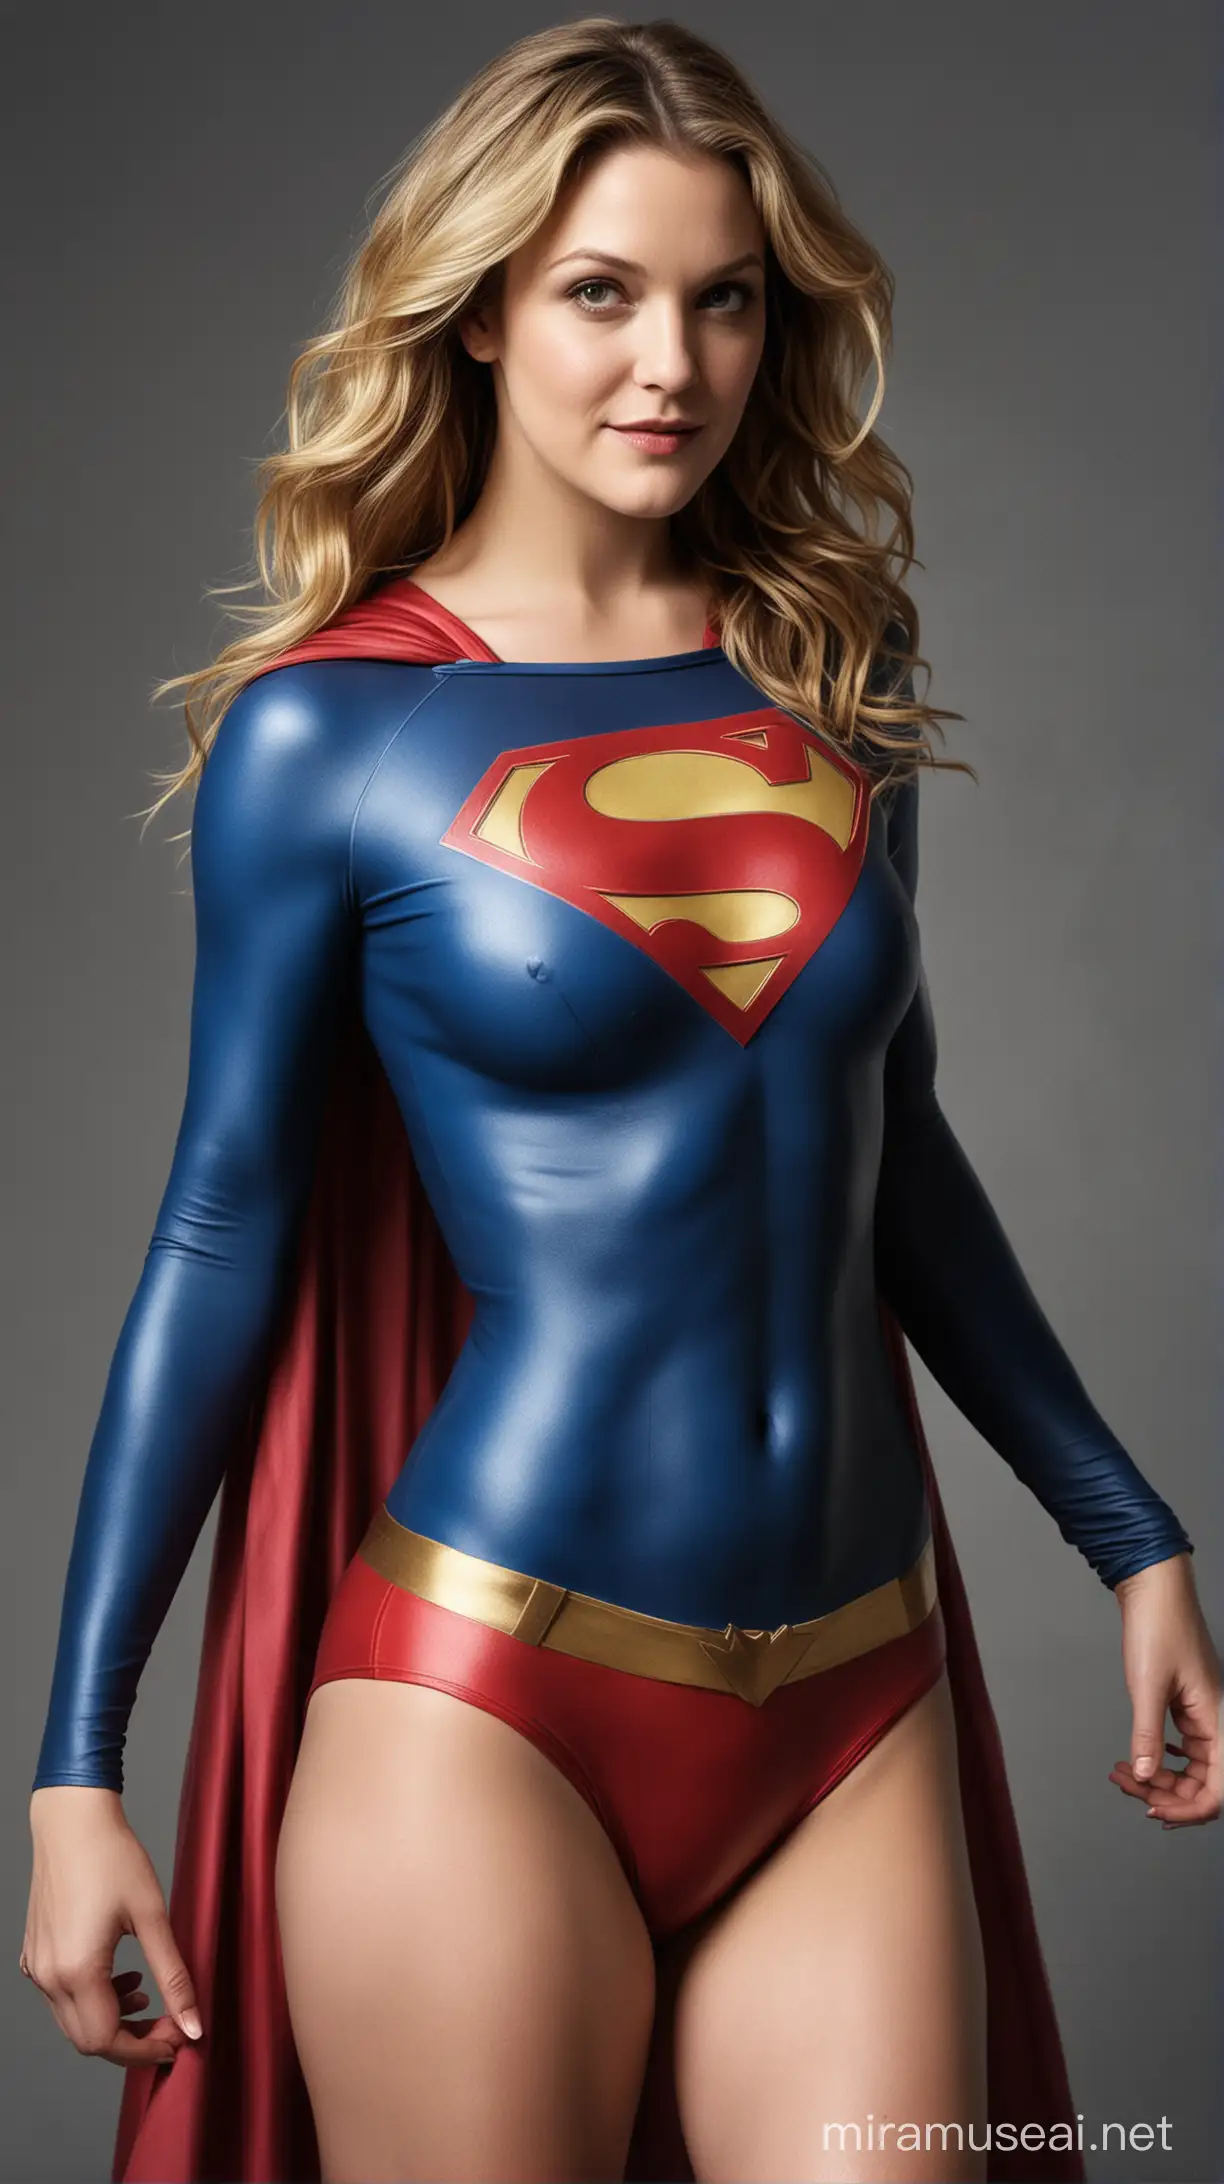 Young Drew Barrymore sexually provocative pose Supergirl bodypaint, weakened by kryptonite